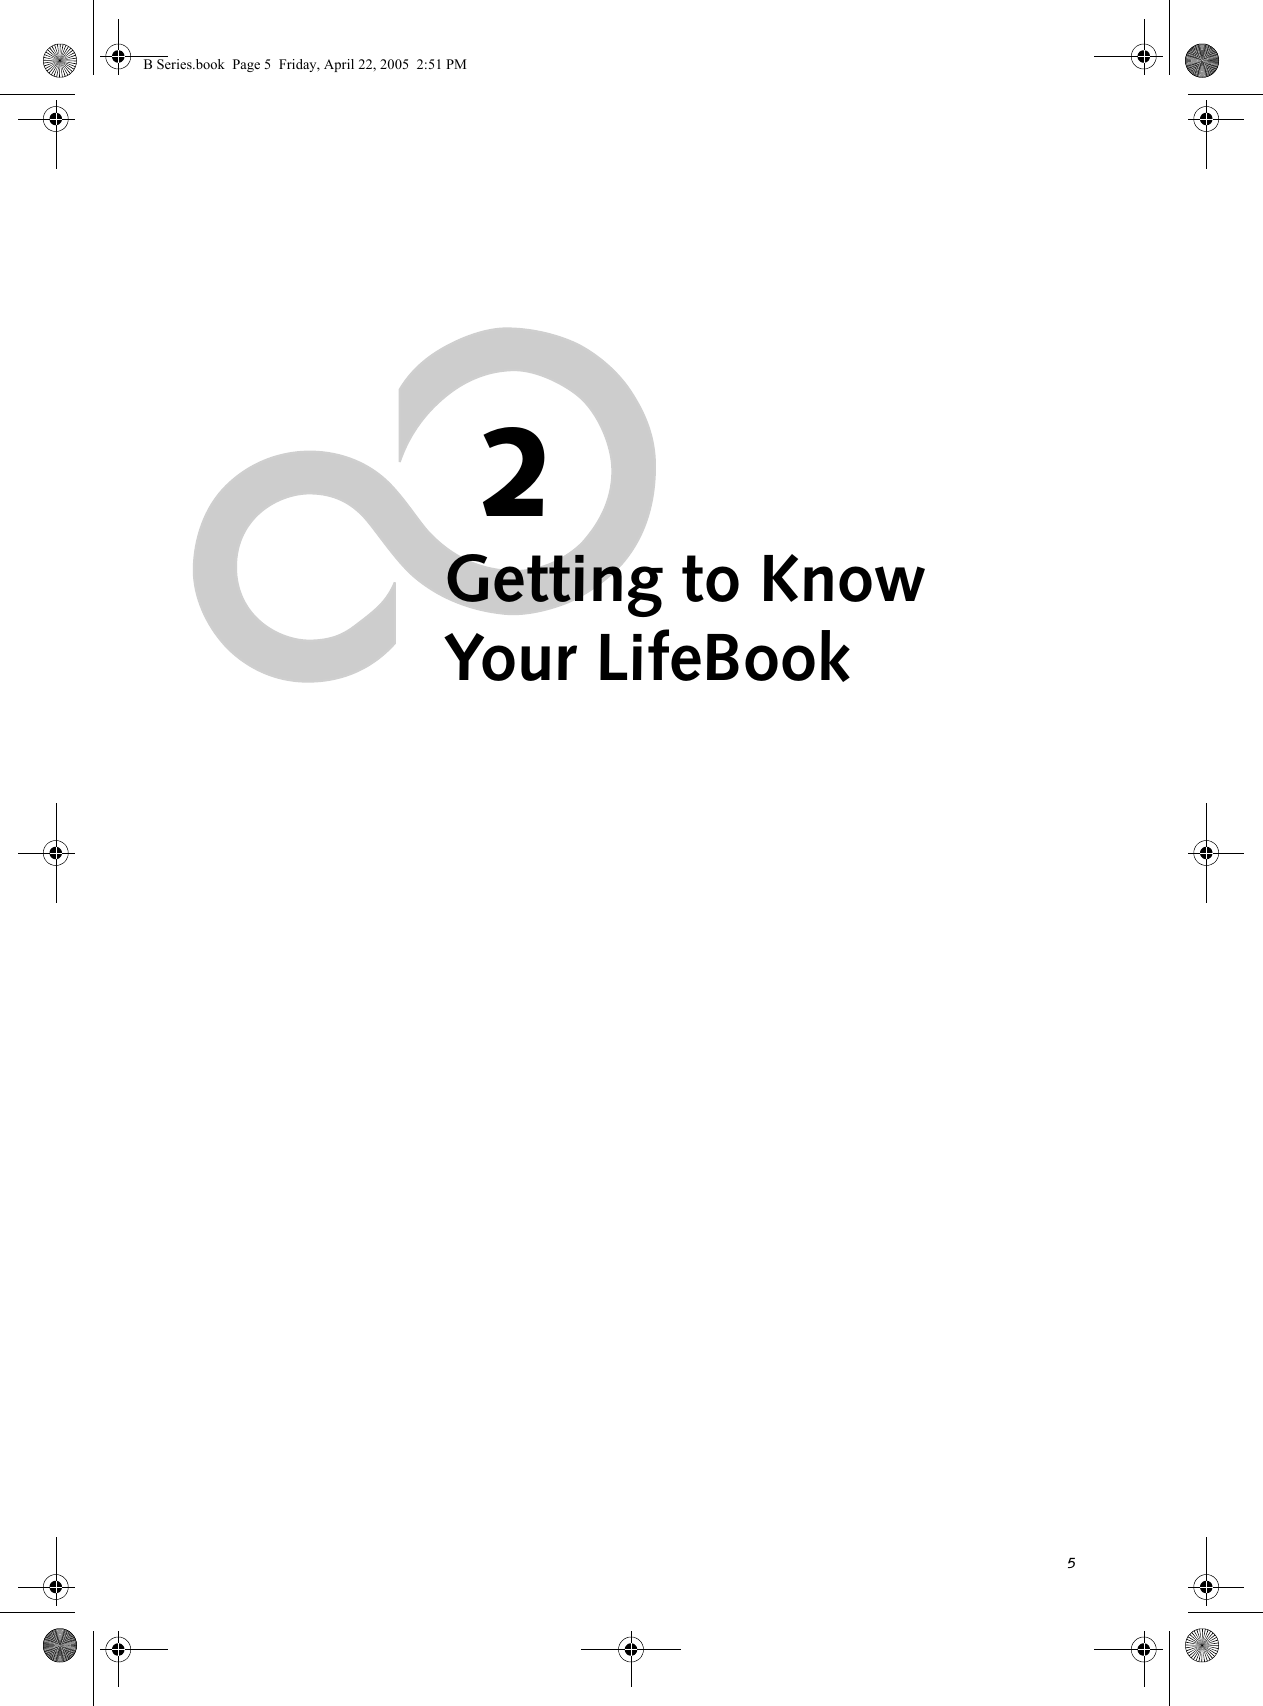 52Getting to KnowYour LifeBookB Series.book  Page 5  Friday, April 22, 2005  2:51 PM